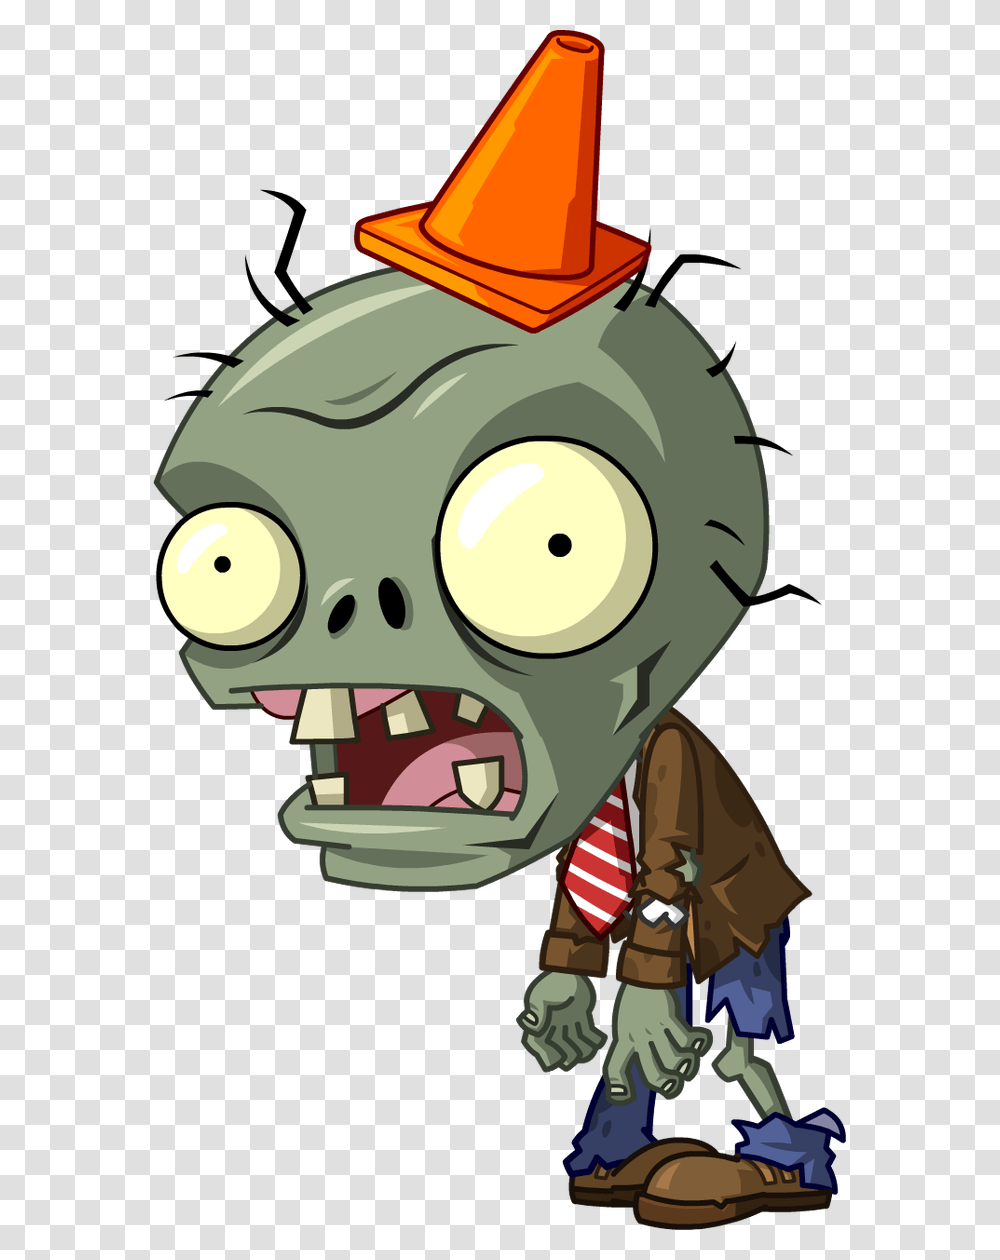 Plants Vs Zombies 1 Conehead Zombie, Teeth, Mouth, Lip Transparent Png